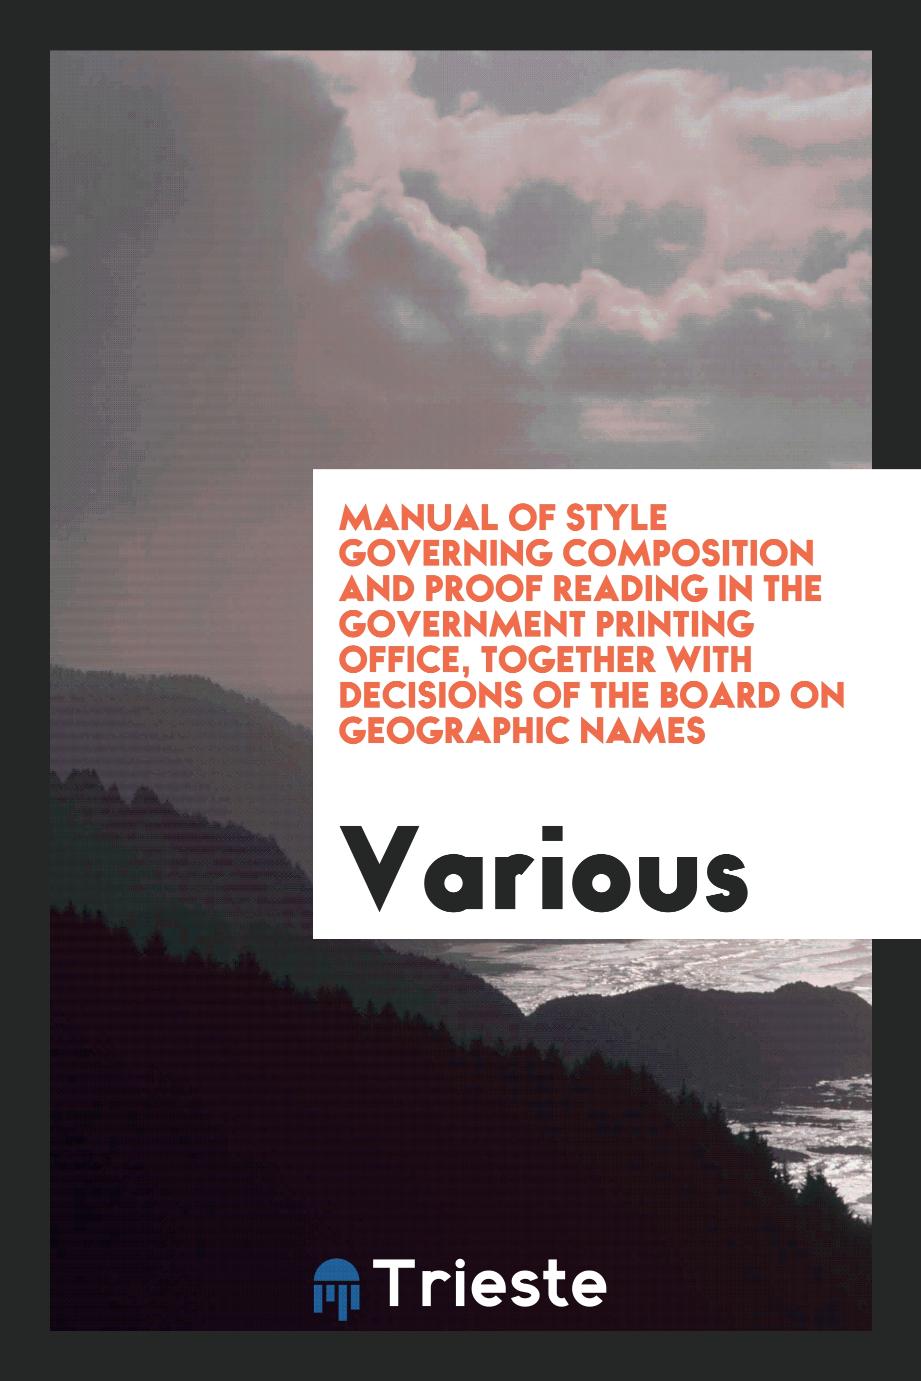 Manual of Style Governing Composition and Proof Reading in the Government Printing Office, Together with Decisions of the Board on Geographic Names